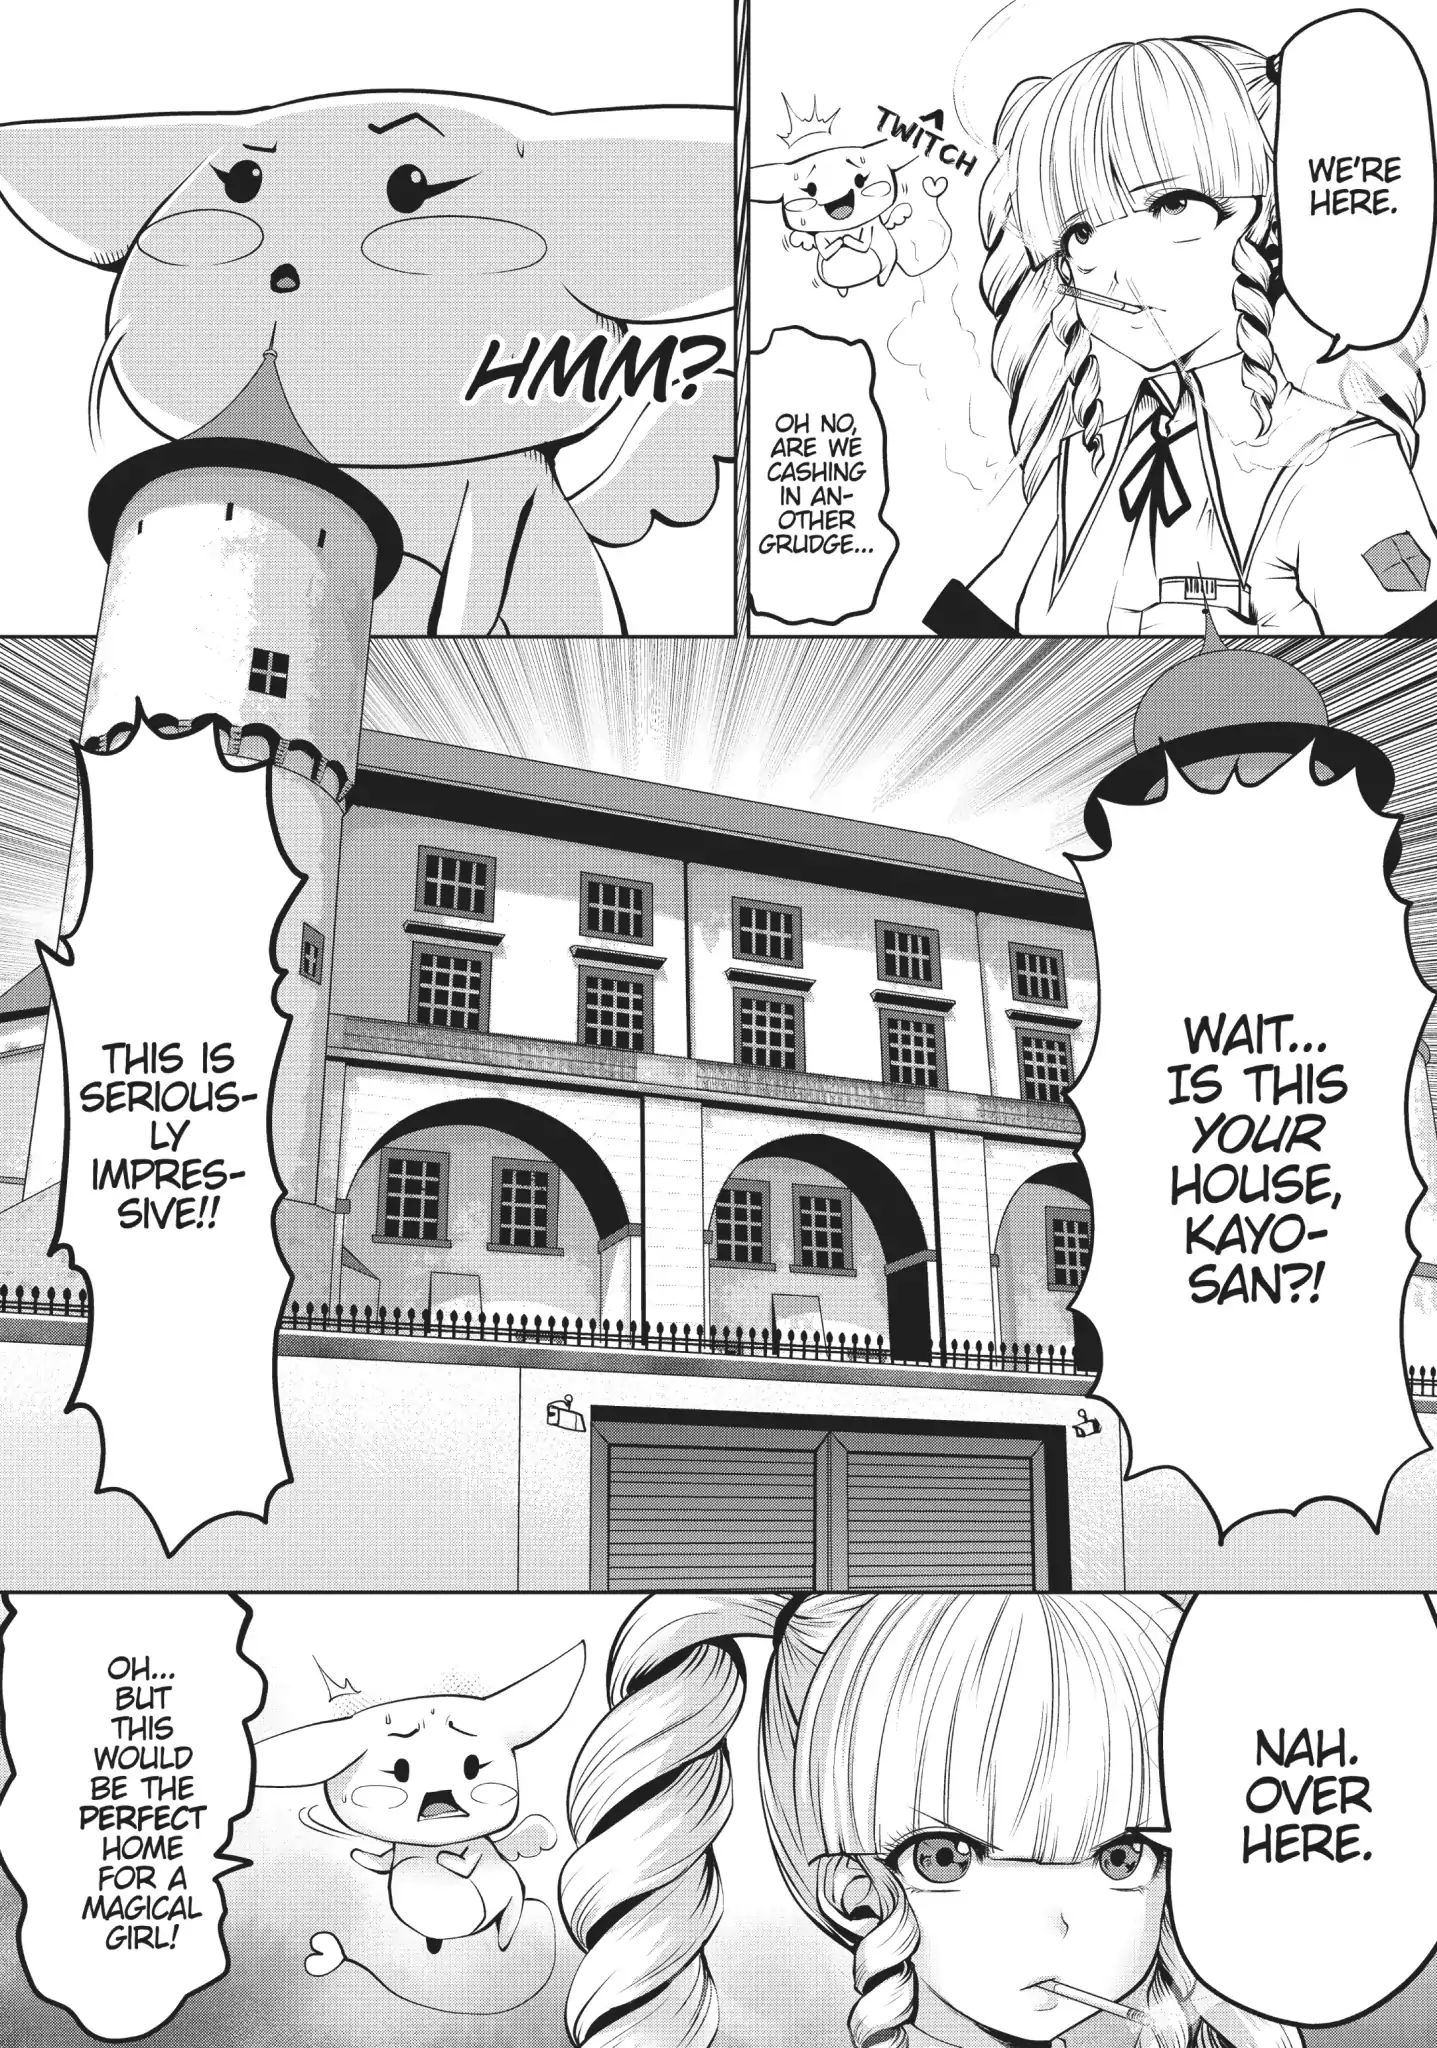 Machimaho: I Messed Up and Made the Wrong Person Into a Magical Girl! - chapter 3 - #3